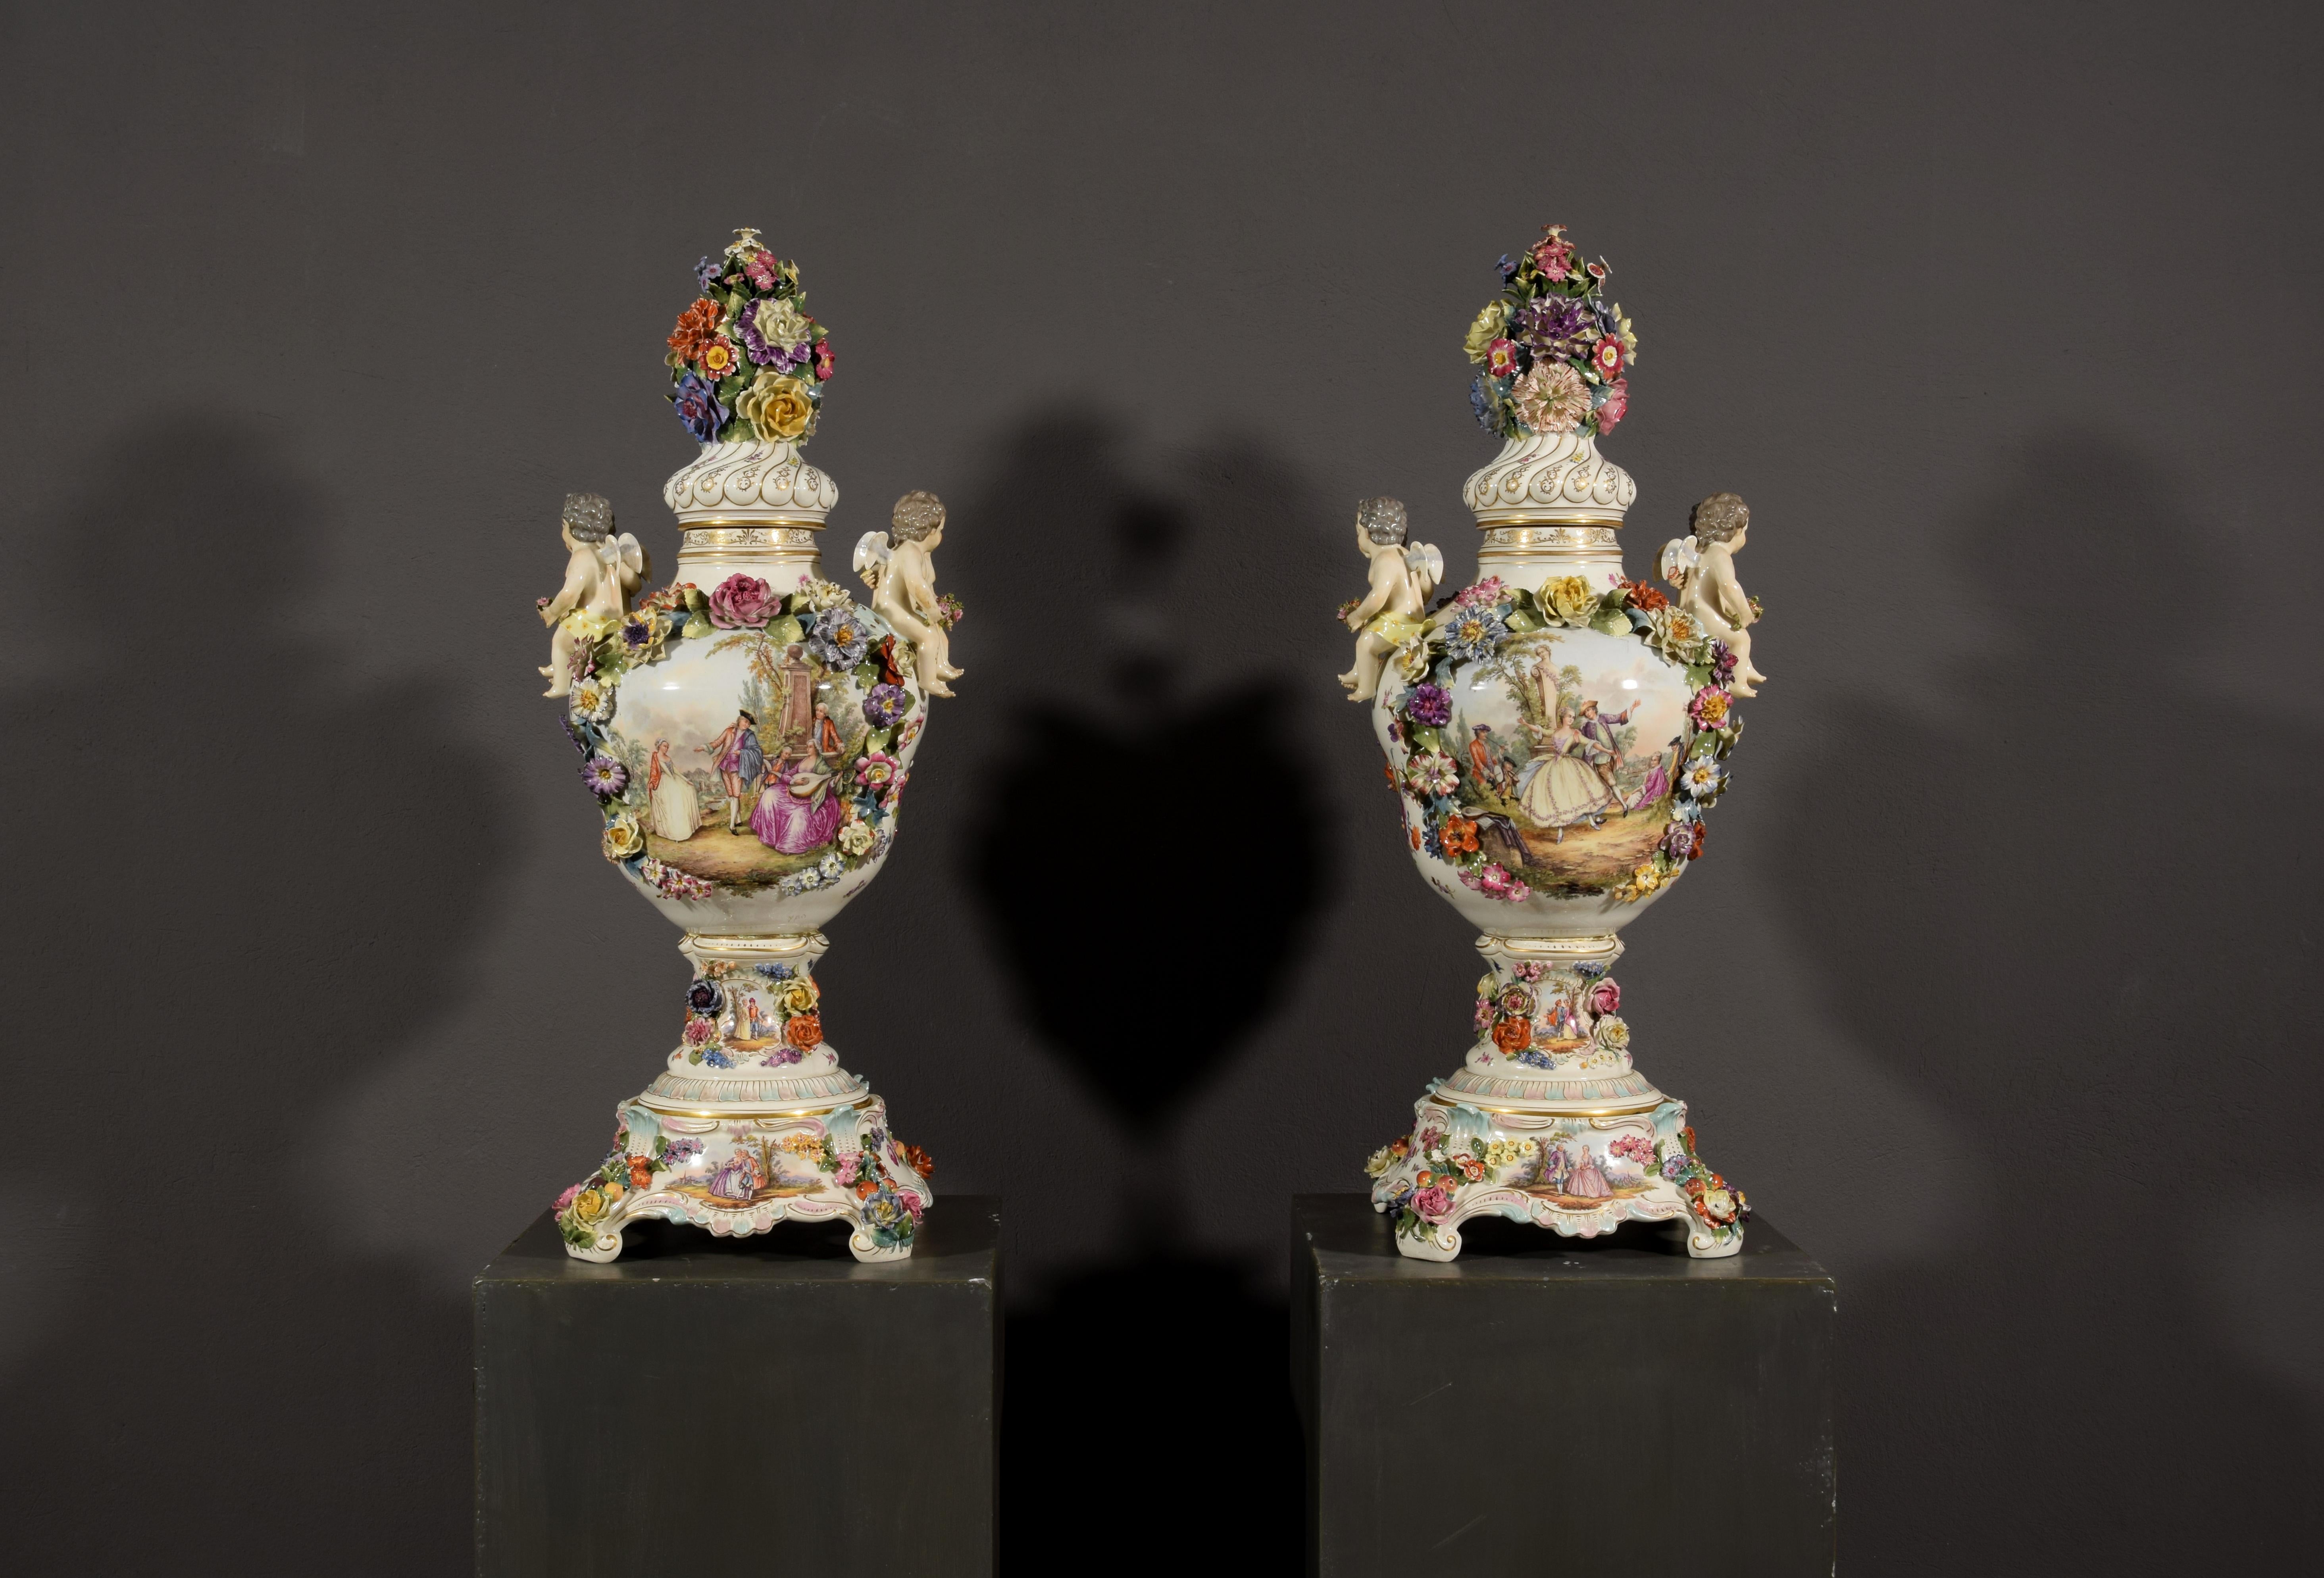 19th Century Pair of German Polychrome Porcelain Vases For Sale 5